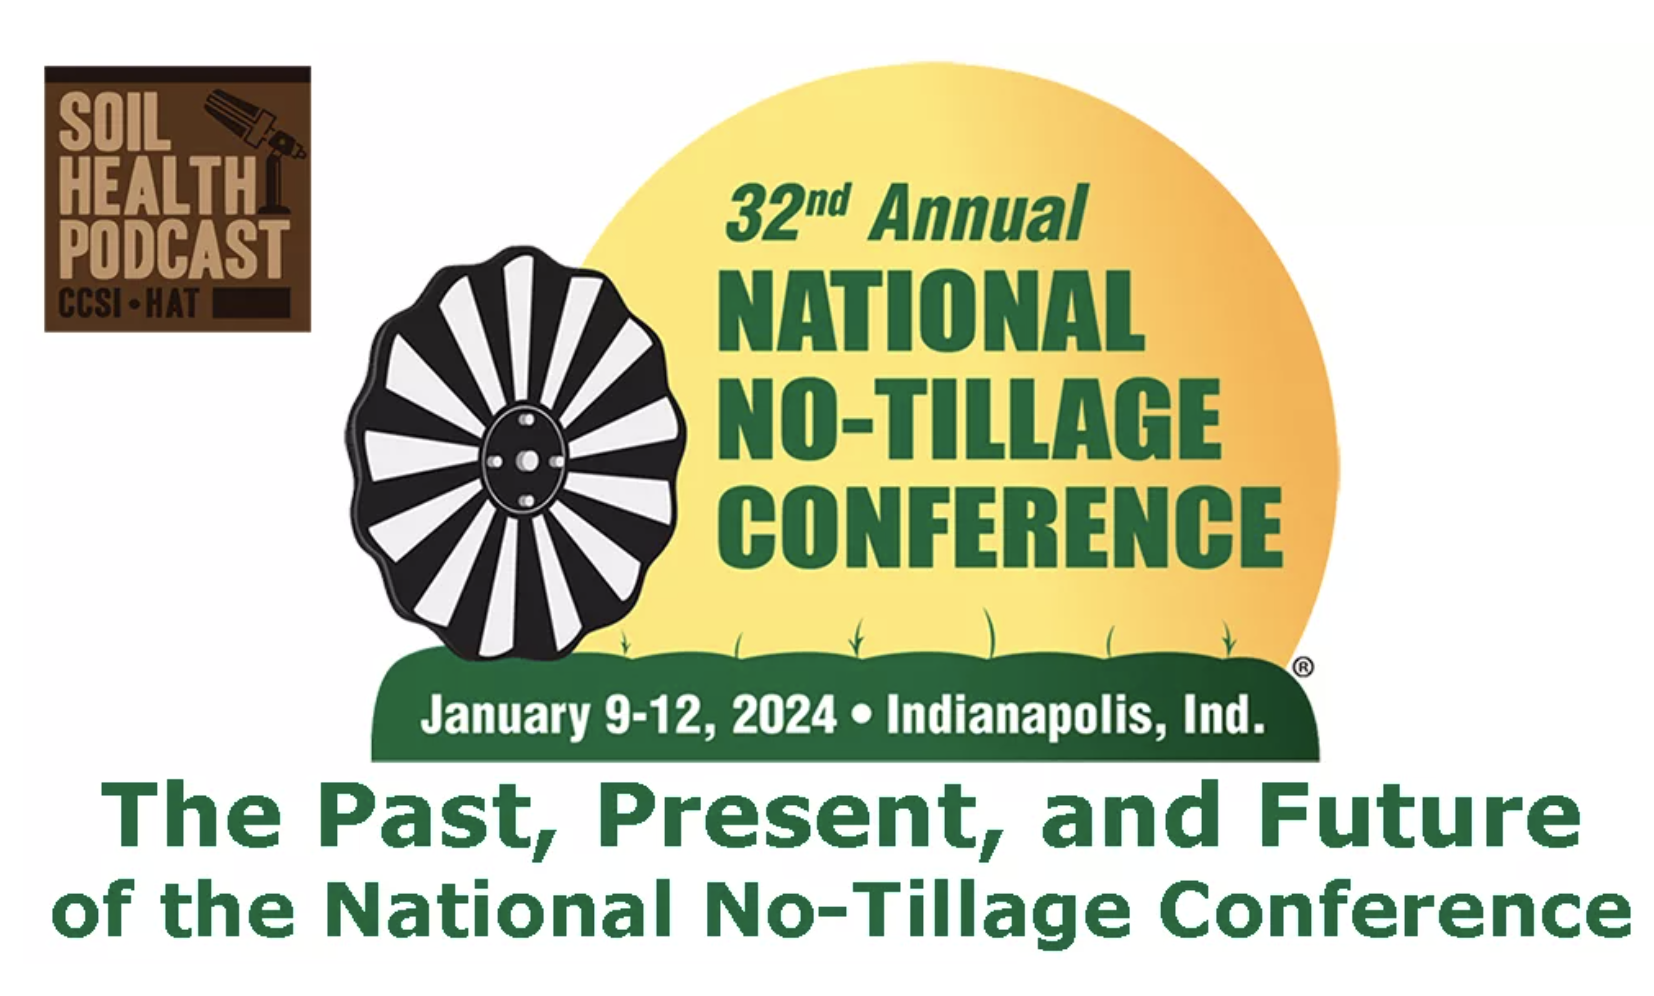 Soil Health Podcast, The Past, Present, and Future of the National No-Tillage Conference